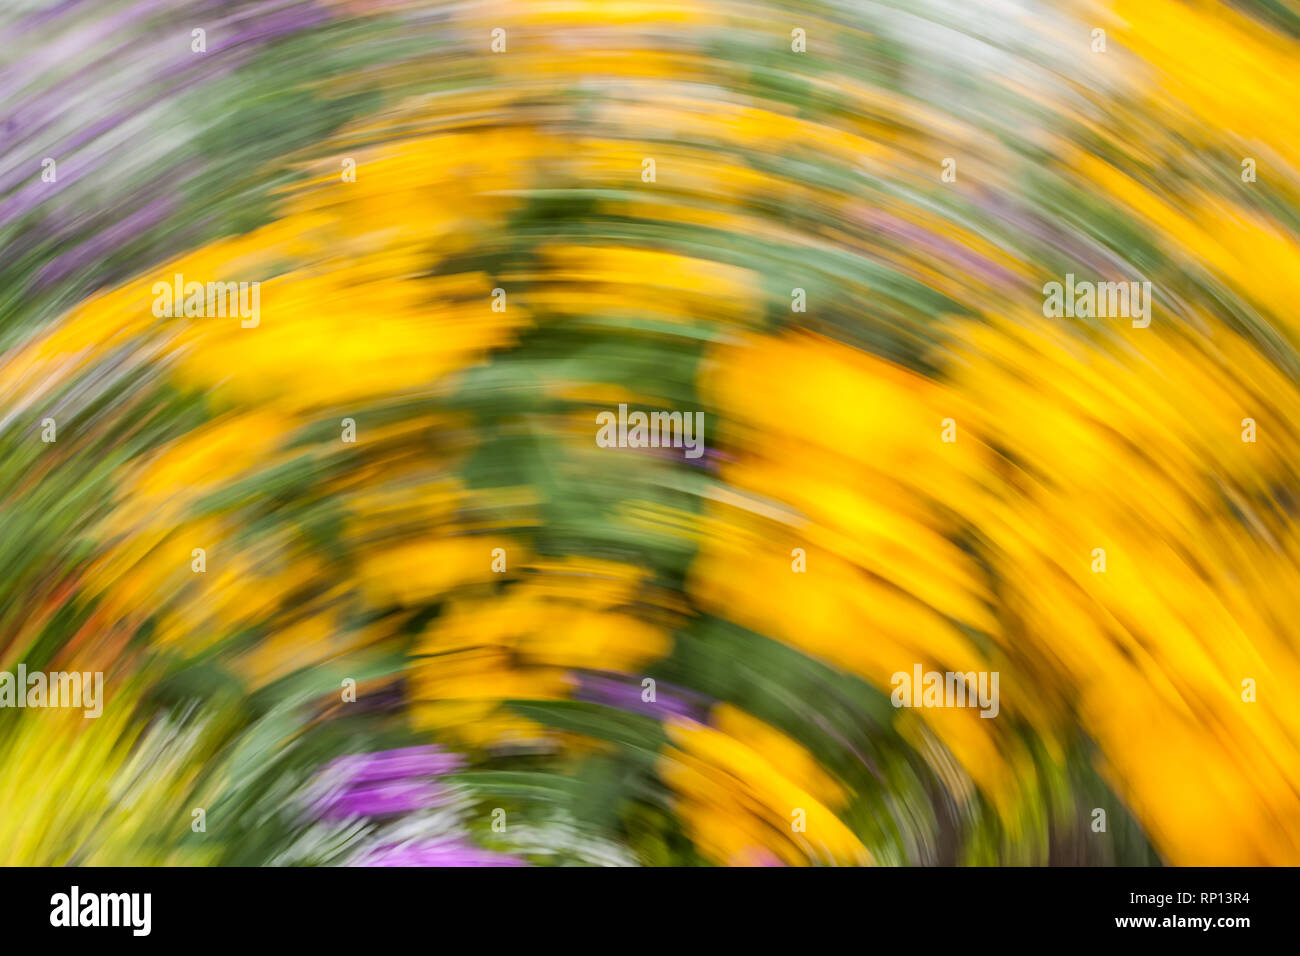 Abstract blurred photo in motion of bright yellow Rudbeckia Fulgida cone flowers with dark brown capitula are blossoming in the garden at summer. Stock Photo